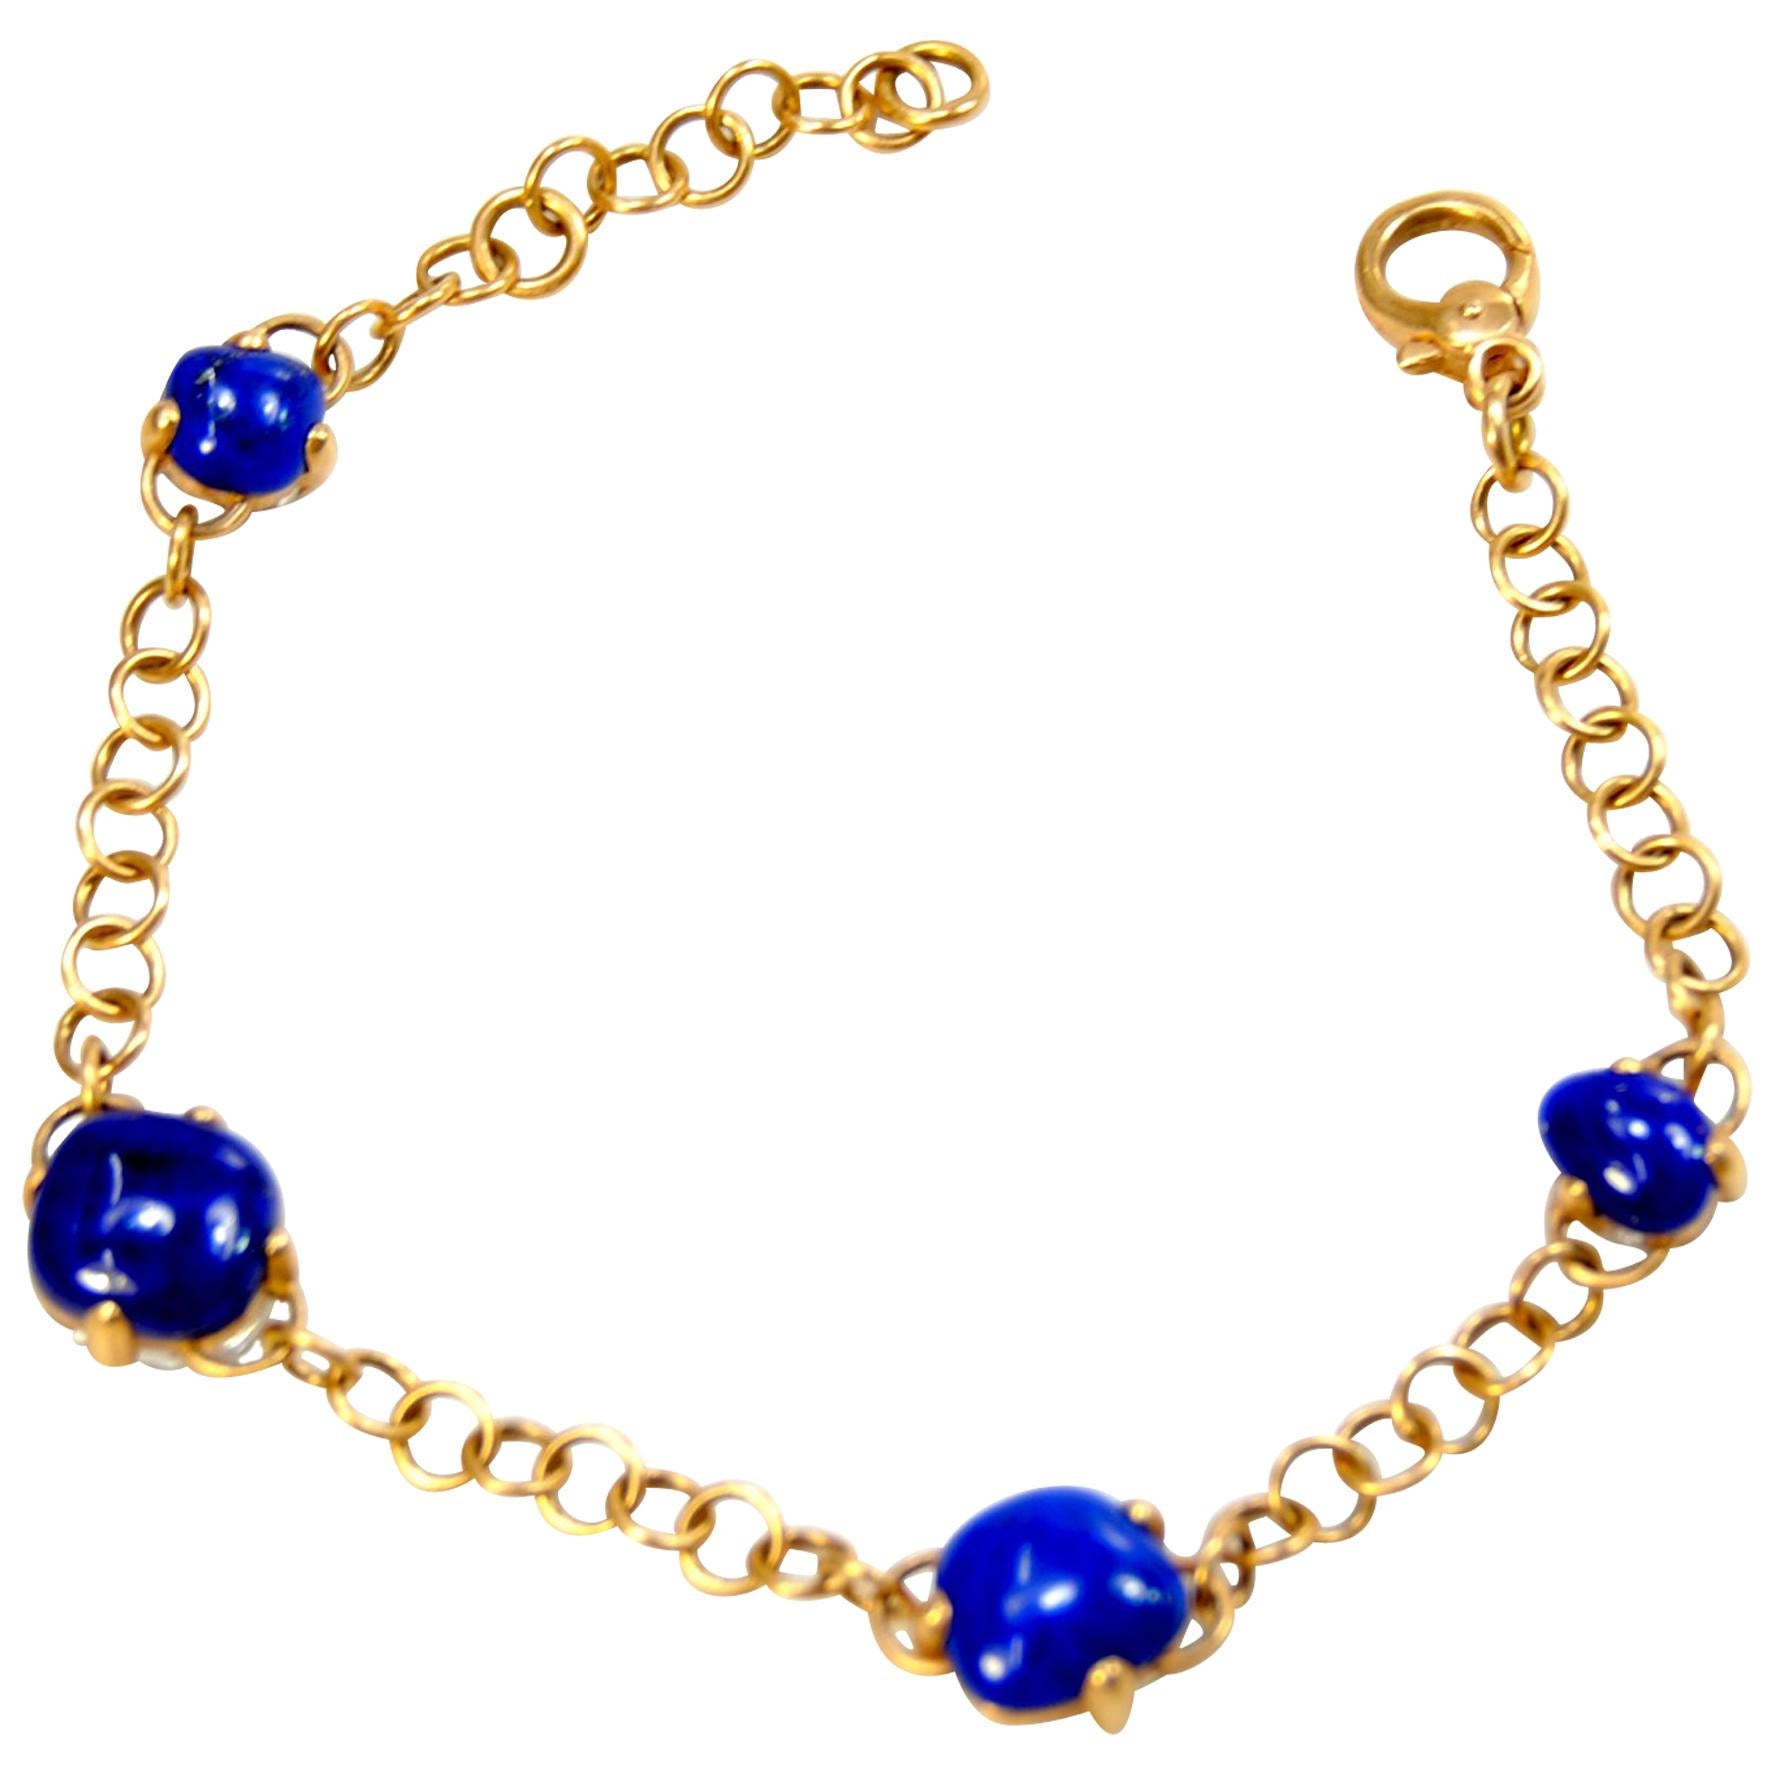 Pomellato Capri Collection Pink Gold with Lapis lazuli and Rock Crystal Bracelet